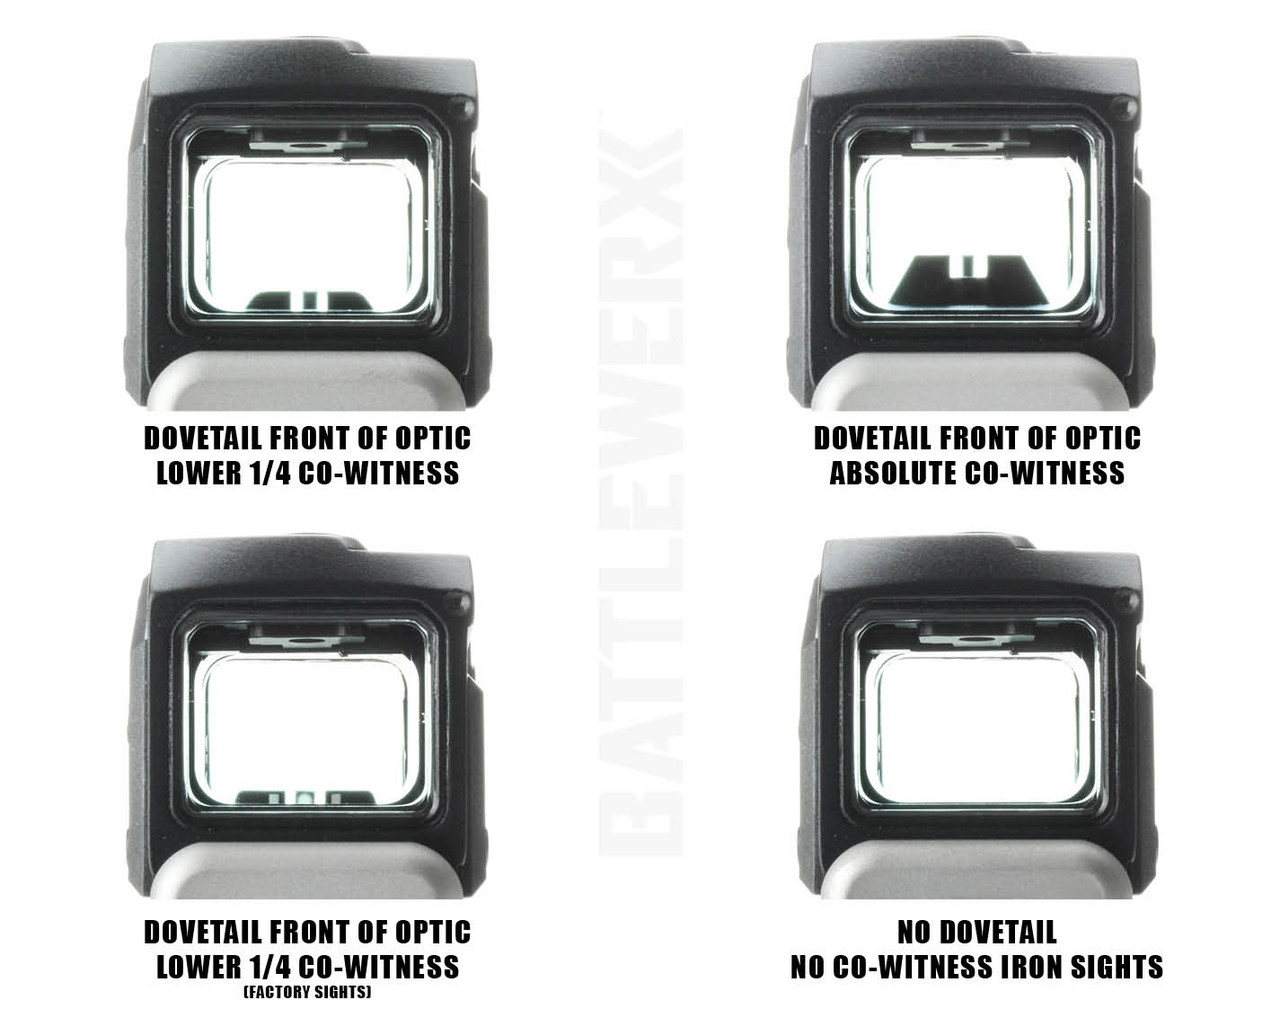 Steiner MPS Optic Cut for Glock Co-witness Heights